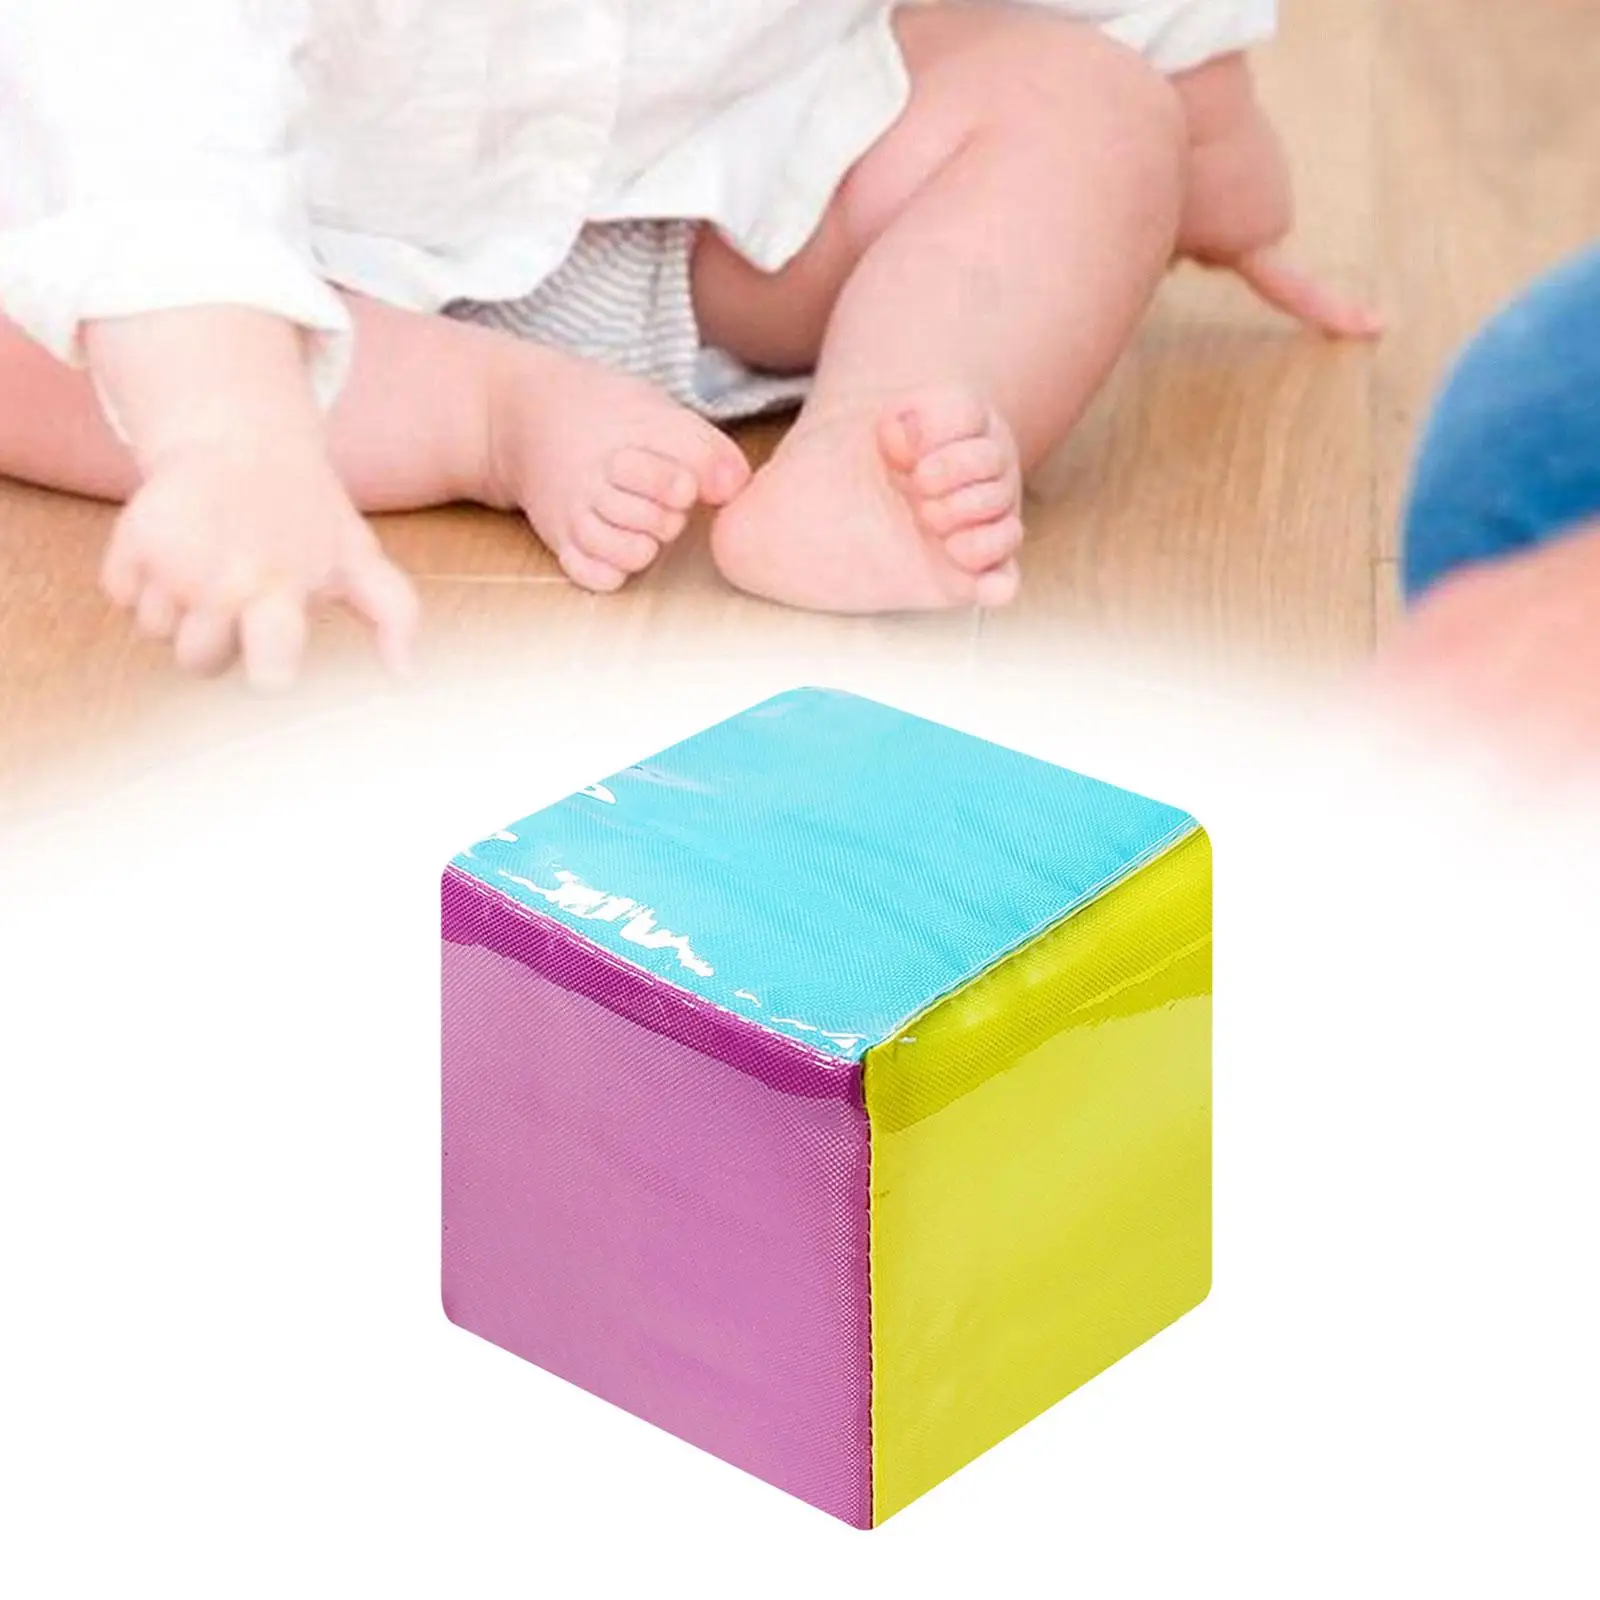 Education Playing Game Dice 10cm Soft Pocket Dice for Blocks Toys Classroom